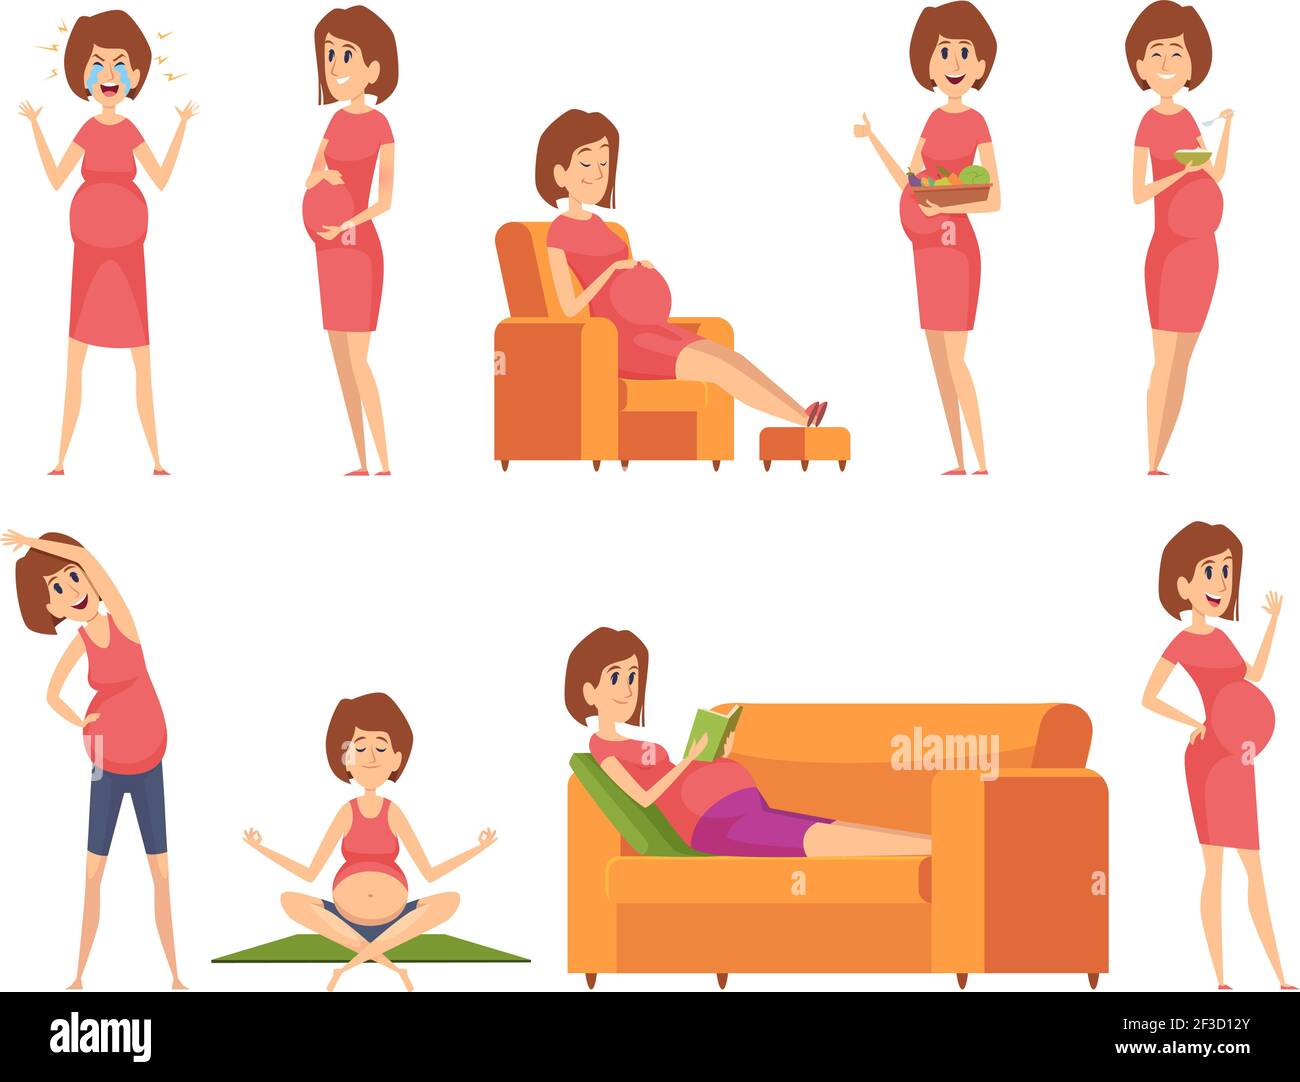 Pregnant characters. Healthy happy woman eating sleeping sporting active working pregnancy female lifestyle vector cartoon Stock Vector